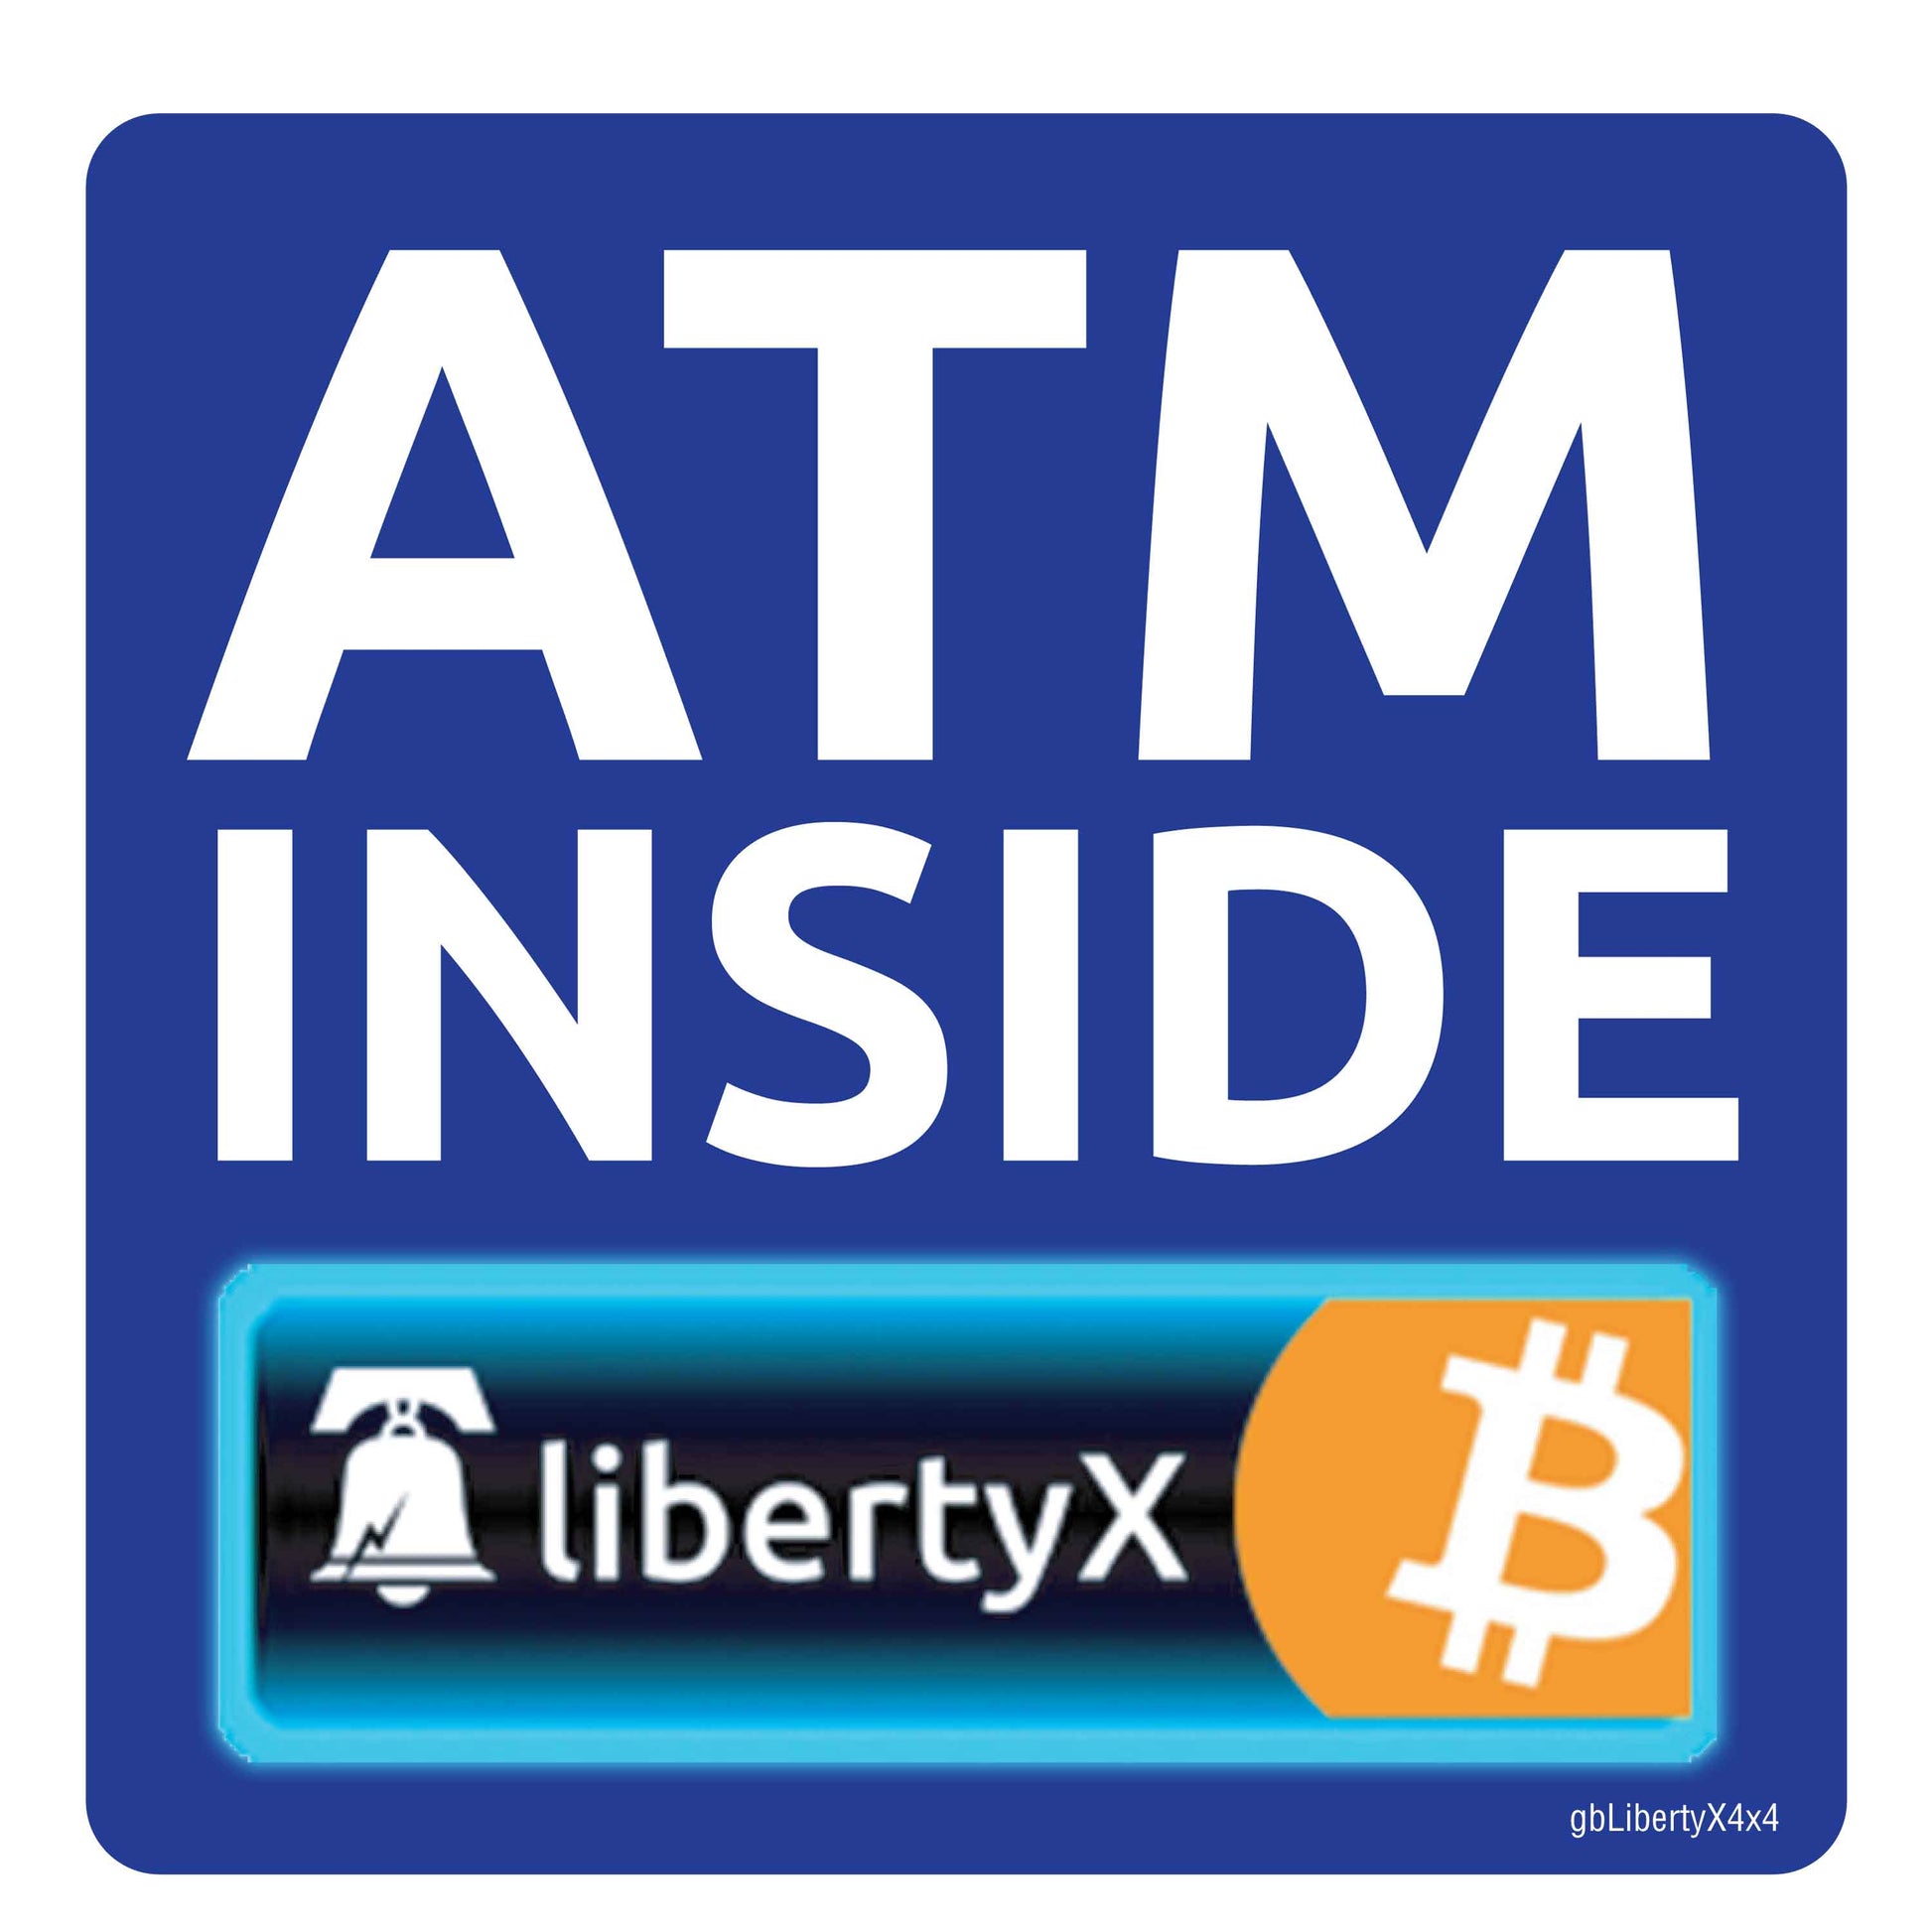 LibertyX Bitcoin ATM Inside Decal. 4 inches by 4 inches in size.